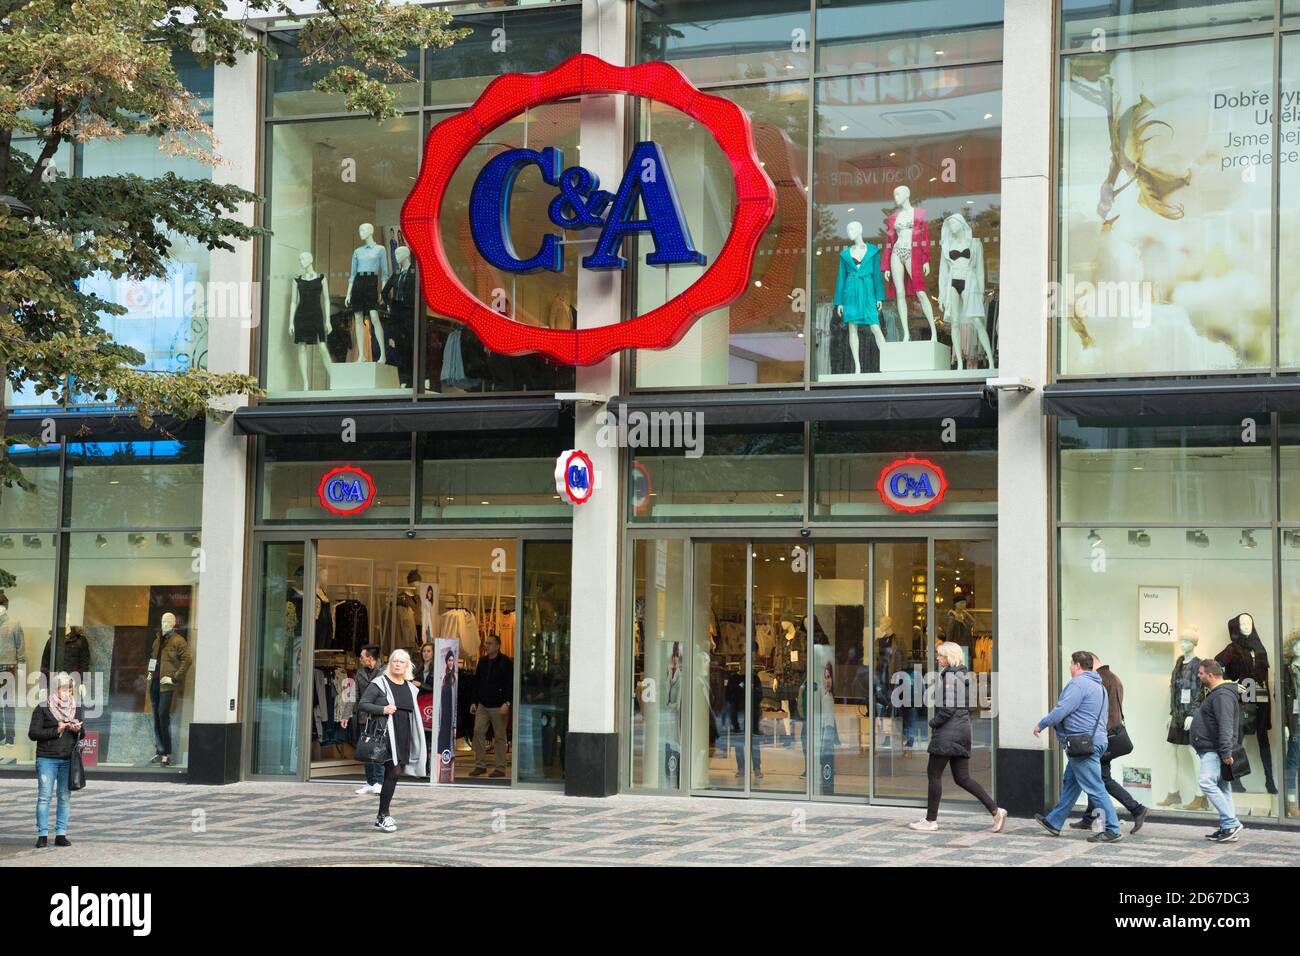 C&A clothing store in Prague Stock Photo